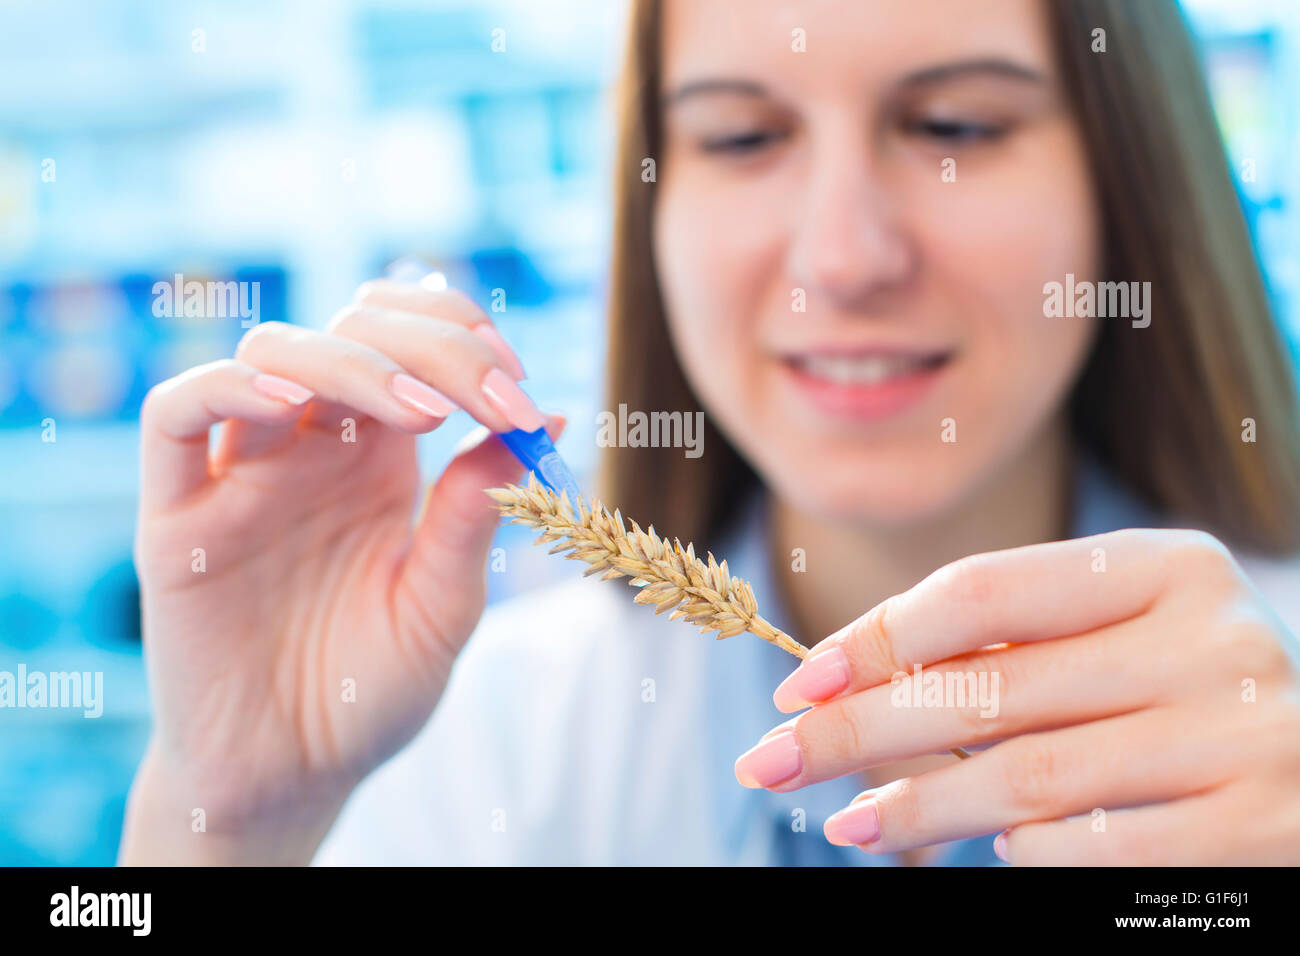 MODEL RELEASED. Female nutritionist testing wheat in the laboratory. Stock Photo